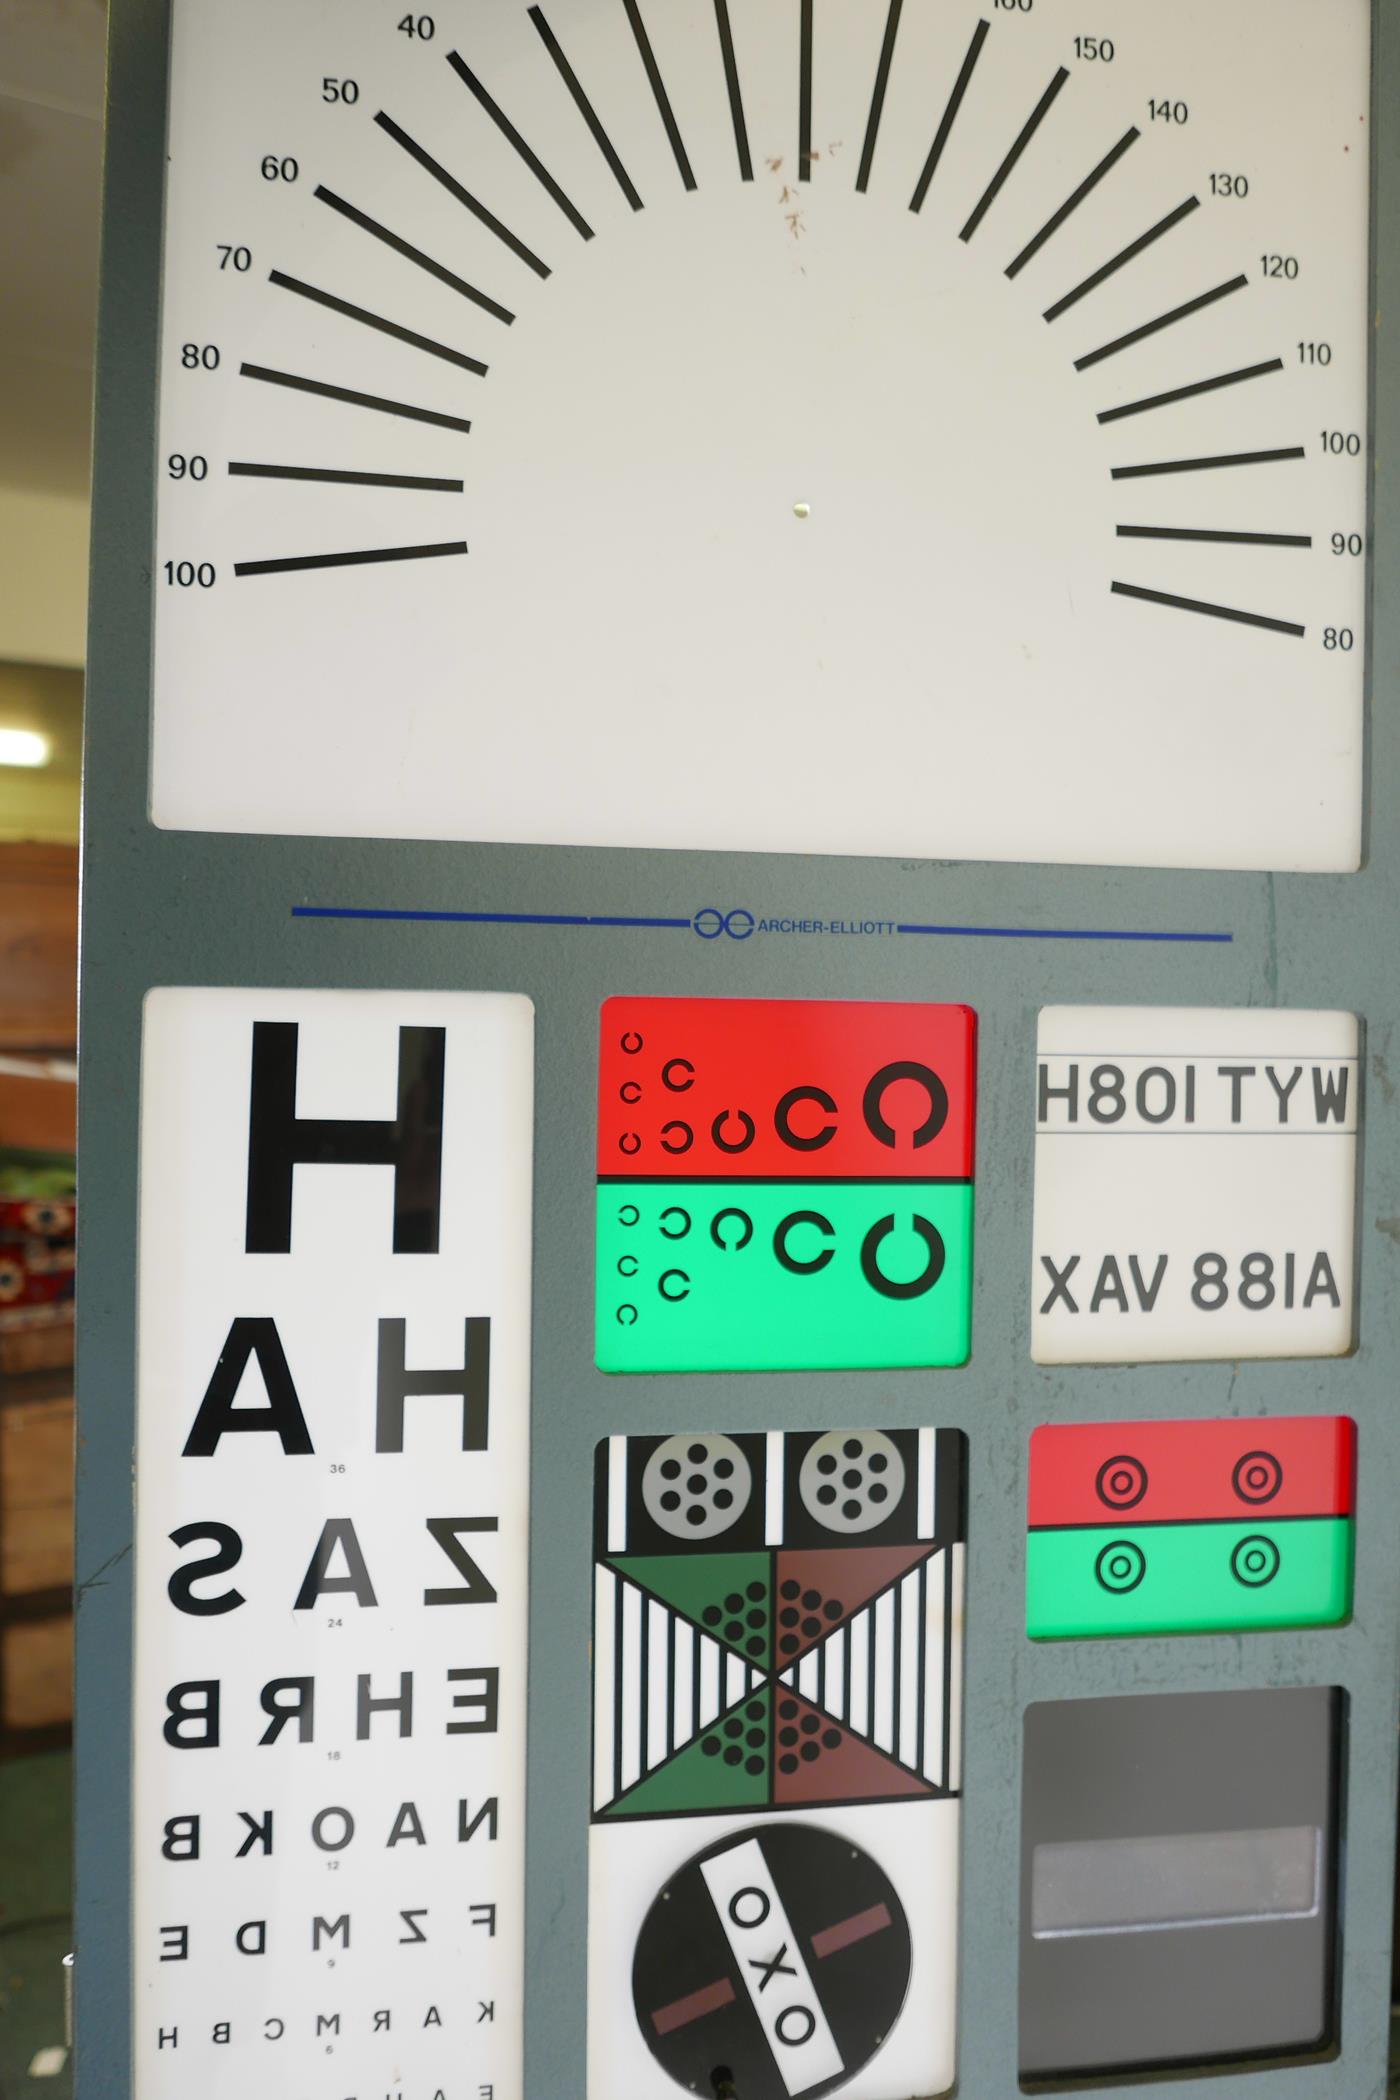 An optician's board for reverse lumination, by Archer-Elliott, 21" x 37" - Image 2 of 2